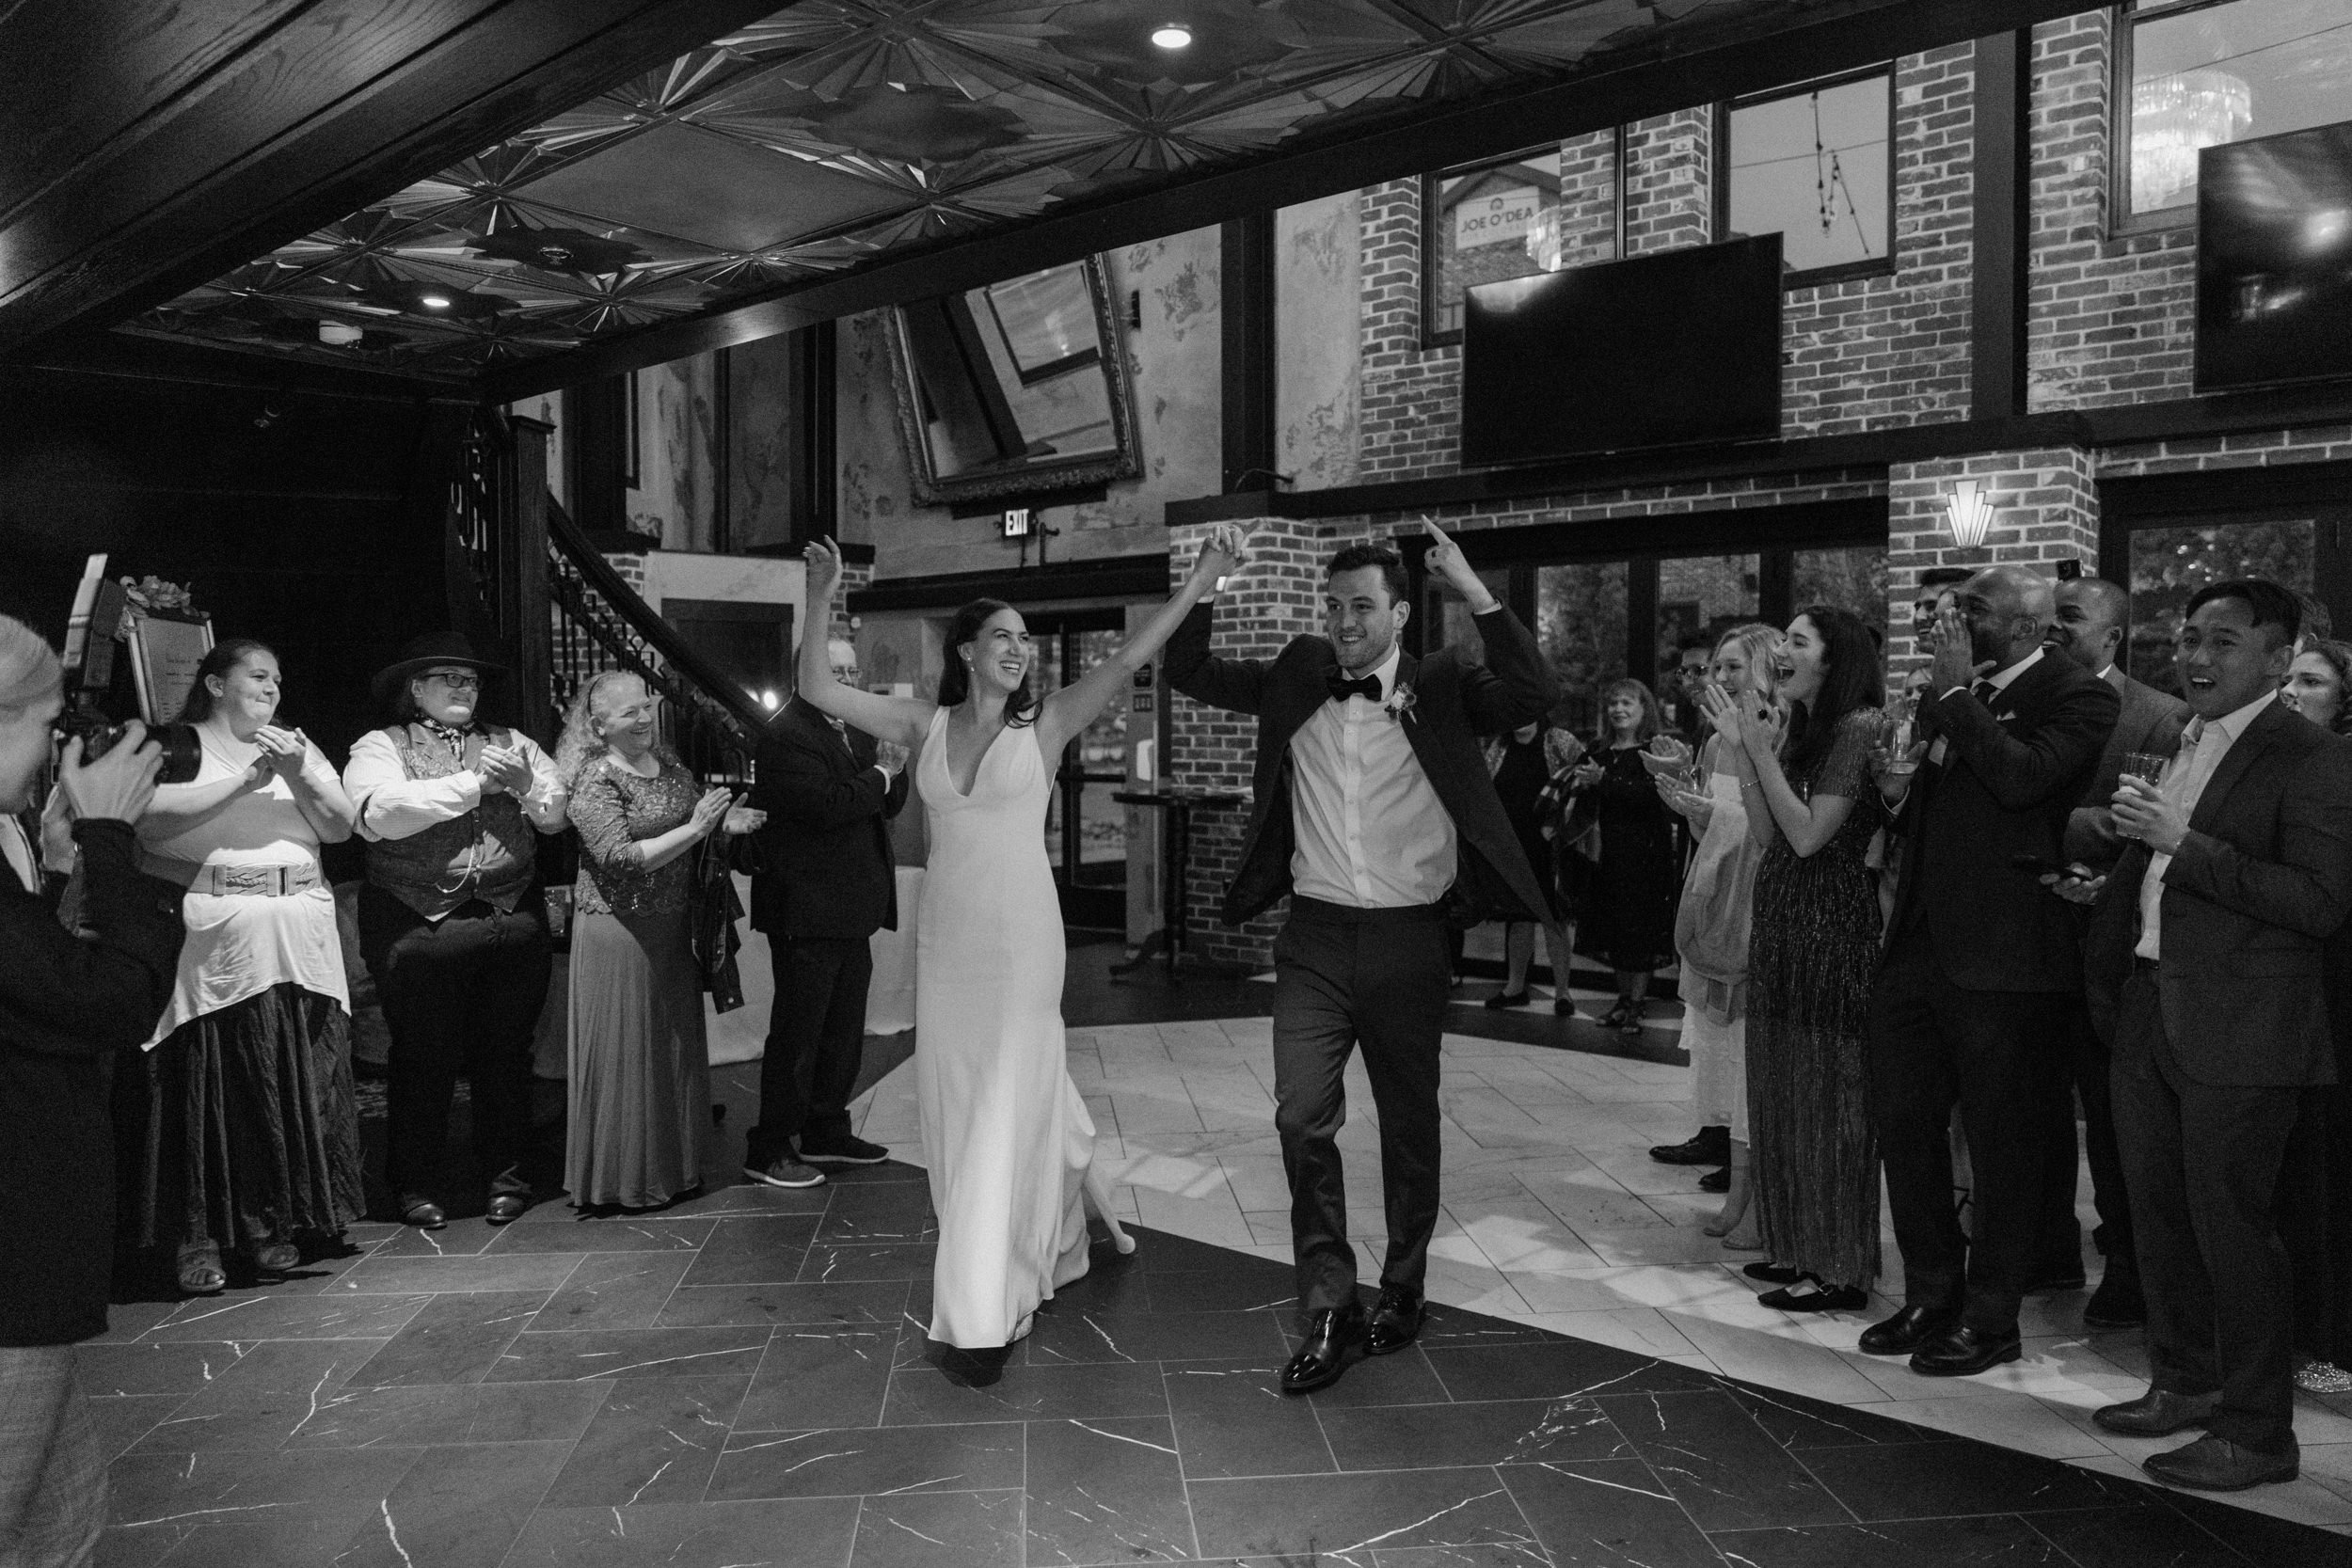 The bride and groom throw their hands in the air as they enter the reception